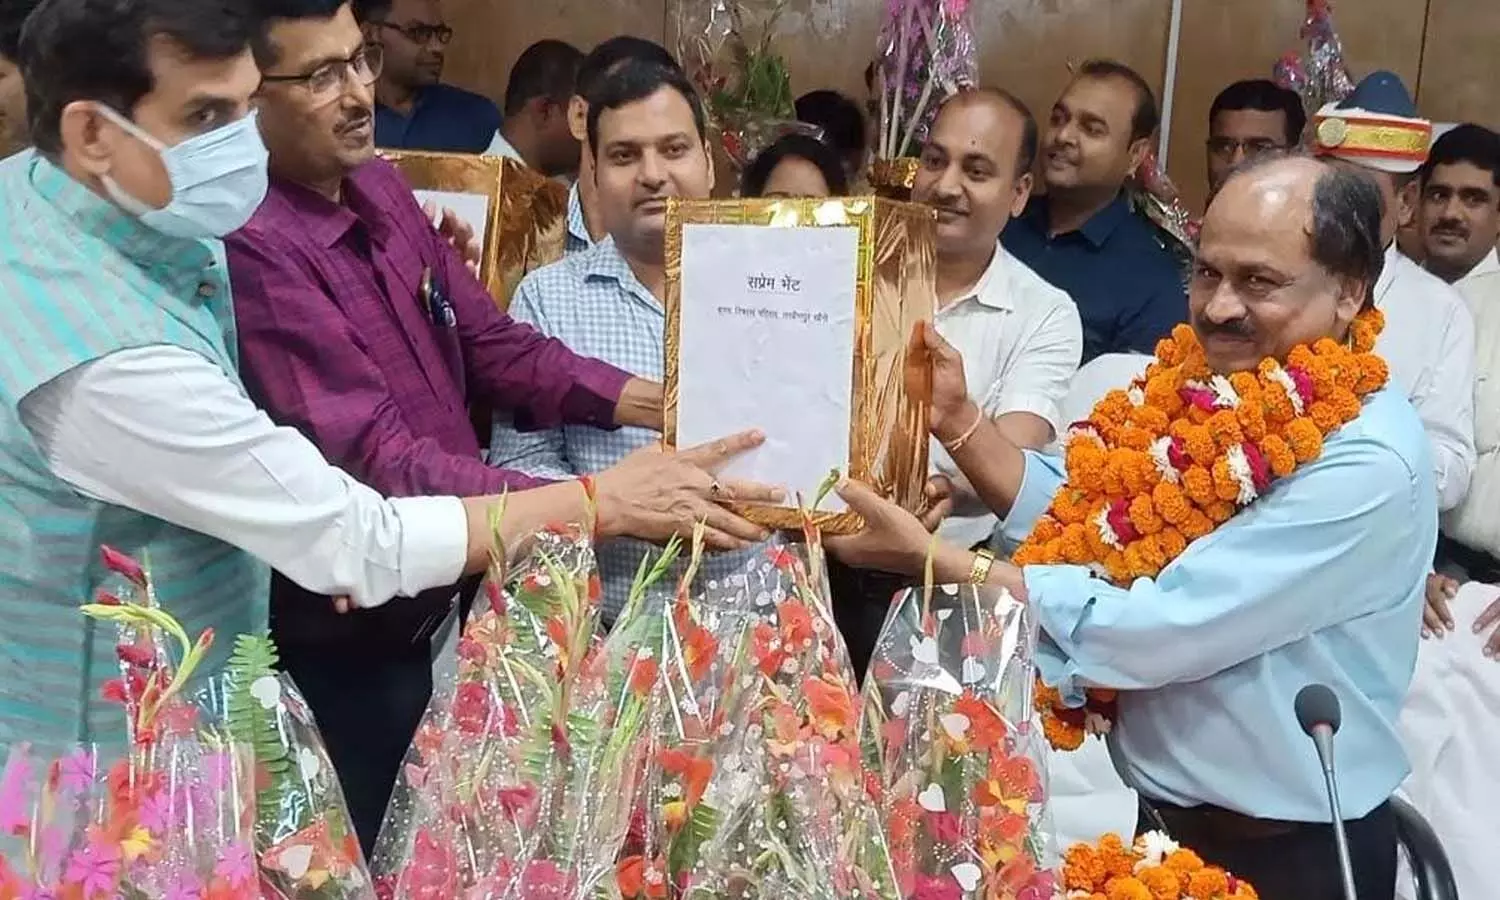 Officers and employees bid farewell to District Magistrate Arvind Kumar Chaurasia